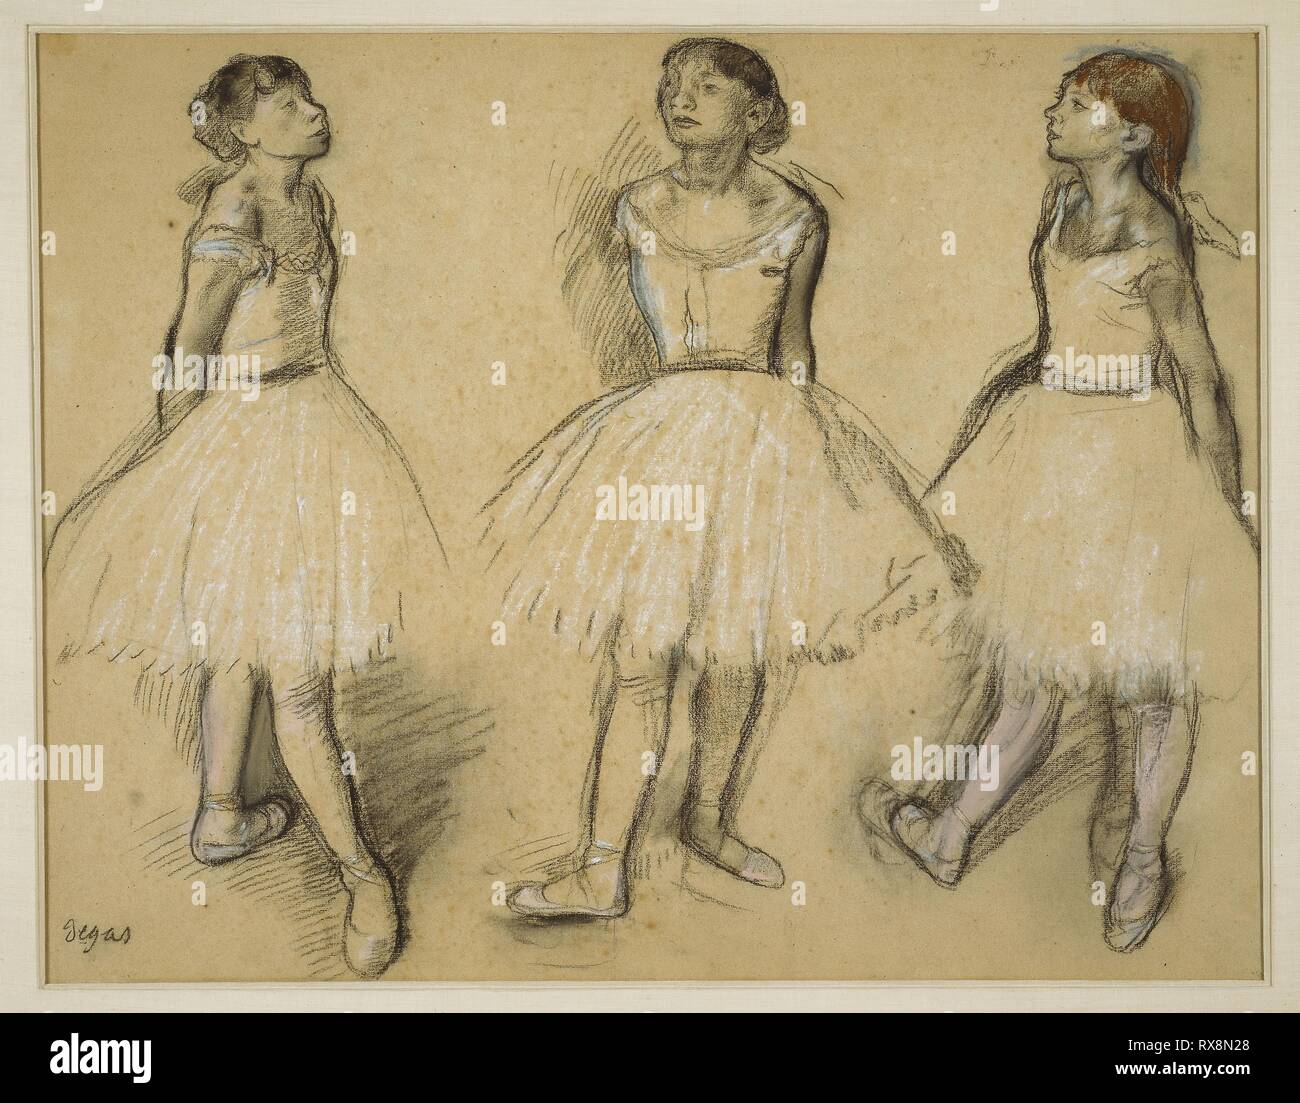 Three Studies Of A Dancer In Fourth Position Edgar Degas French 1834 1917 Date 1879 1880 Dimensions 480 616 Mm Charcoal And Pastel With Stumping And Touches Of Brush And Black Wash On